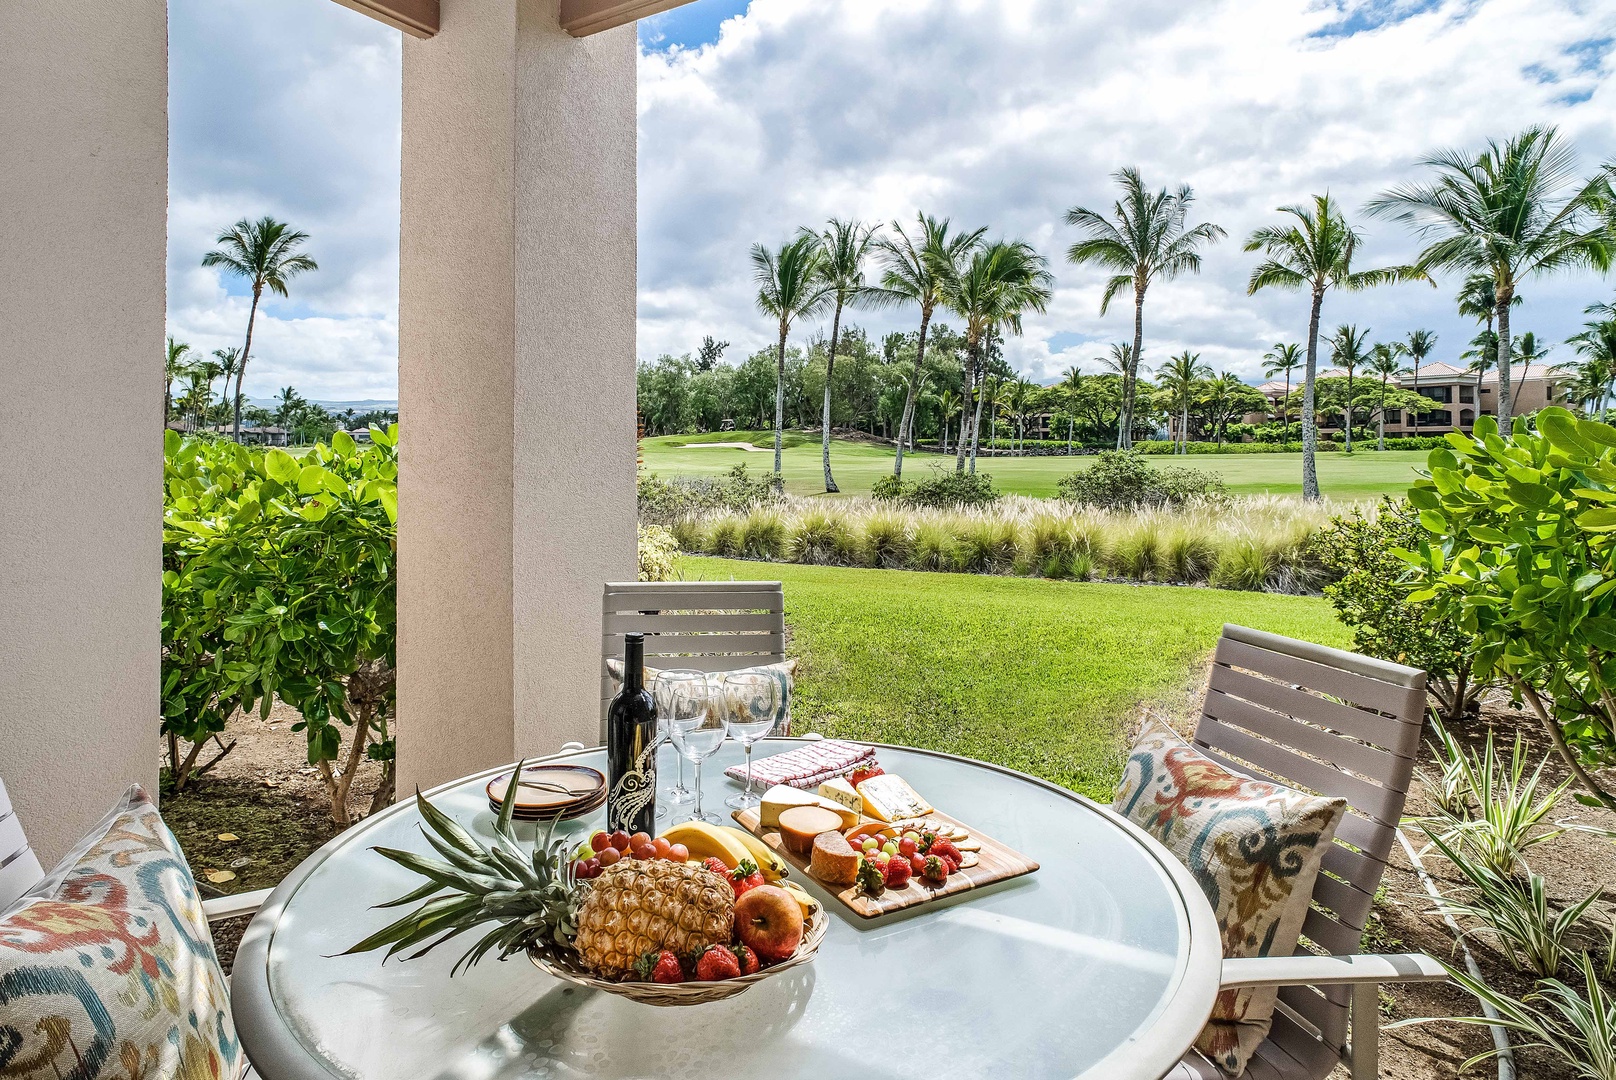 Waikoloa Vacation Rentals, Waikoloa Colony Villas 403 - Additional Dining in Private Patio Outside Dining Room w/ View of Golf Course and Palm Trees